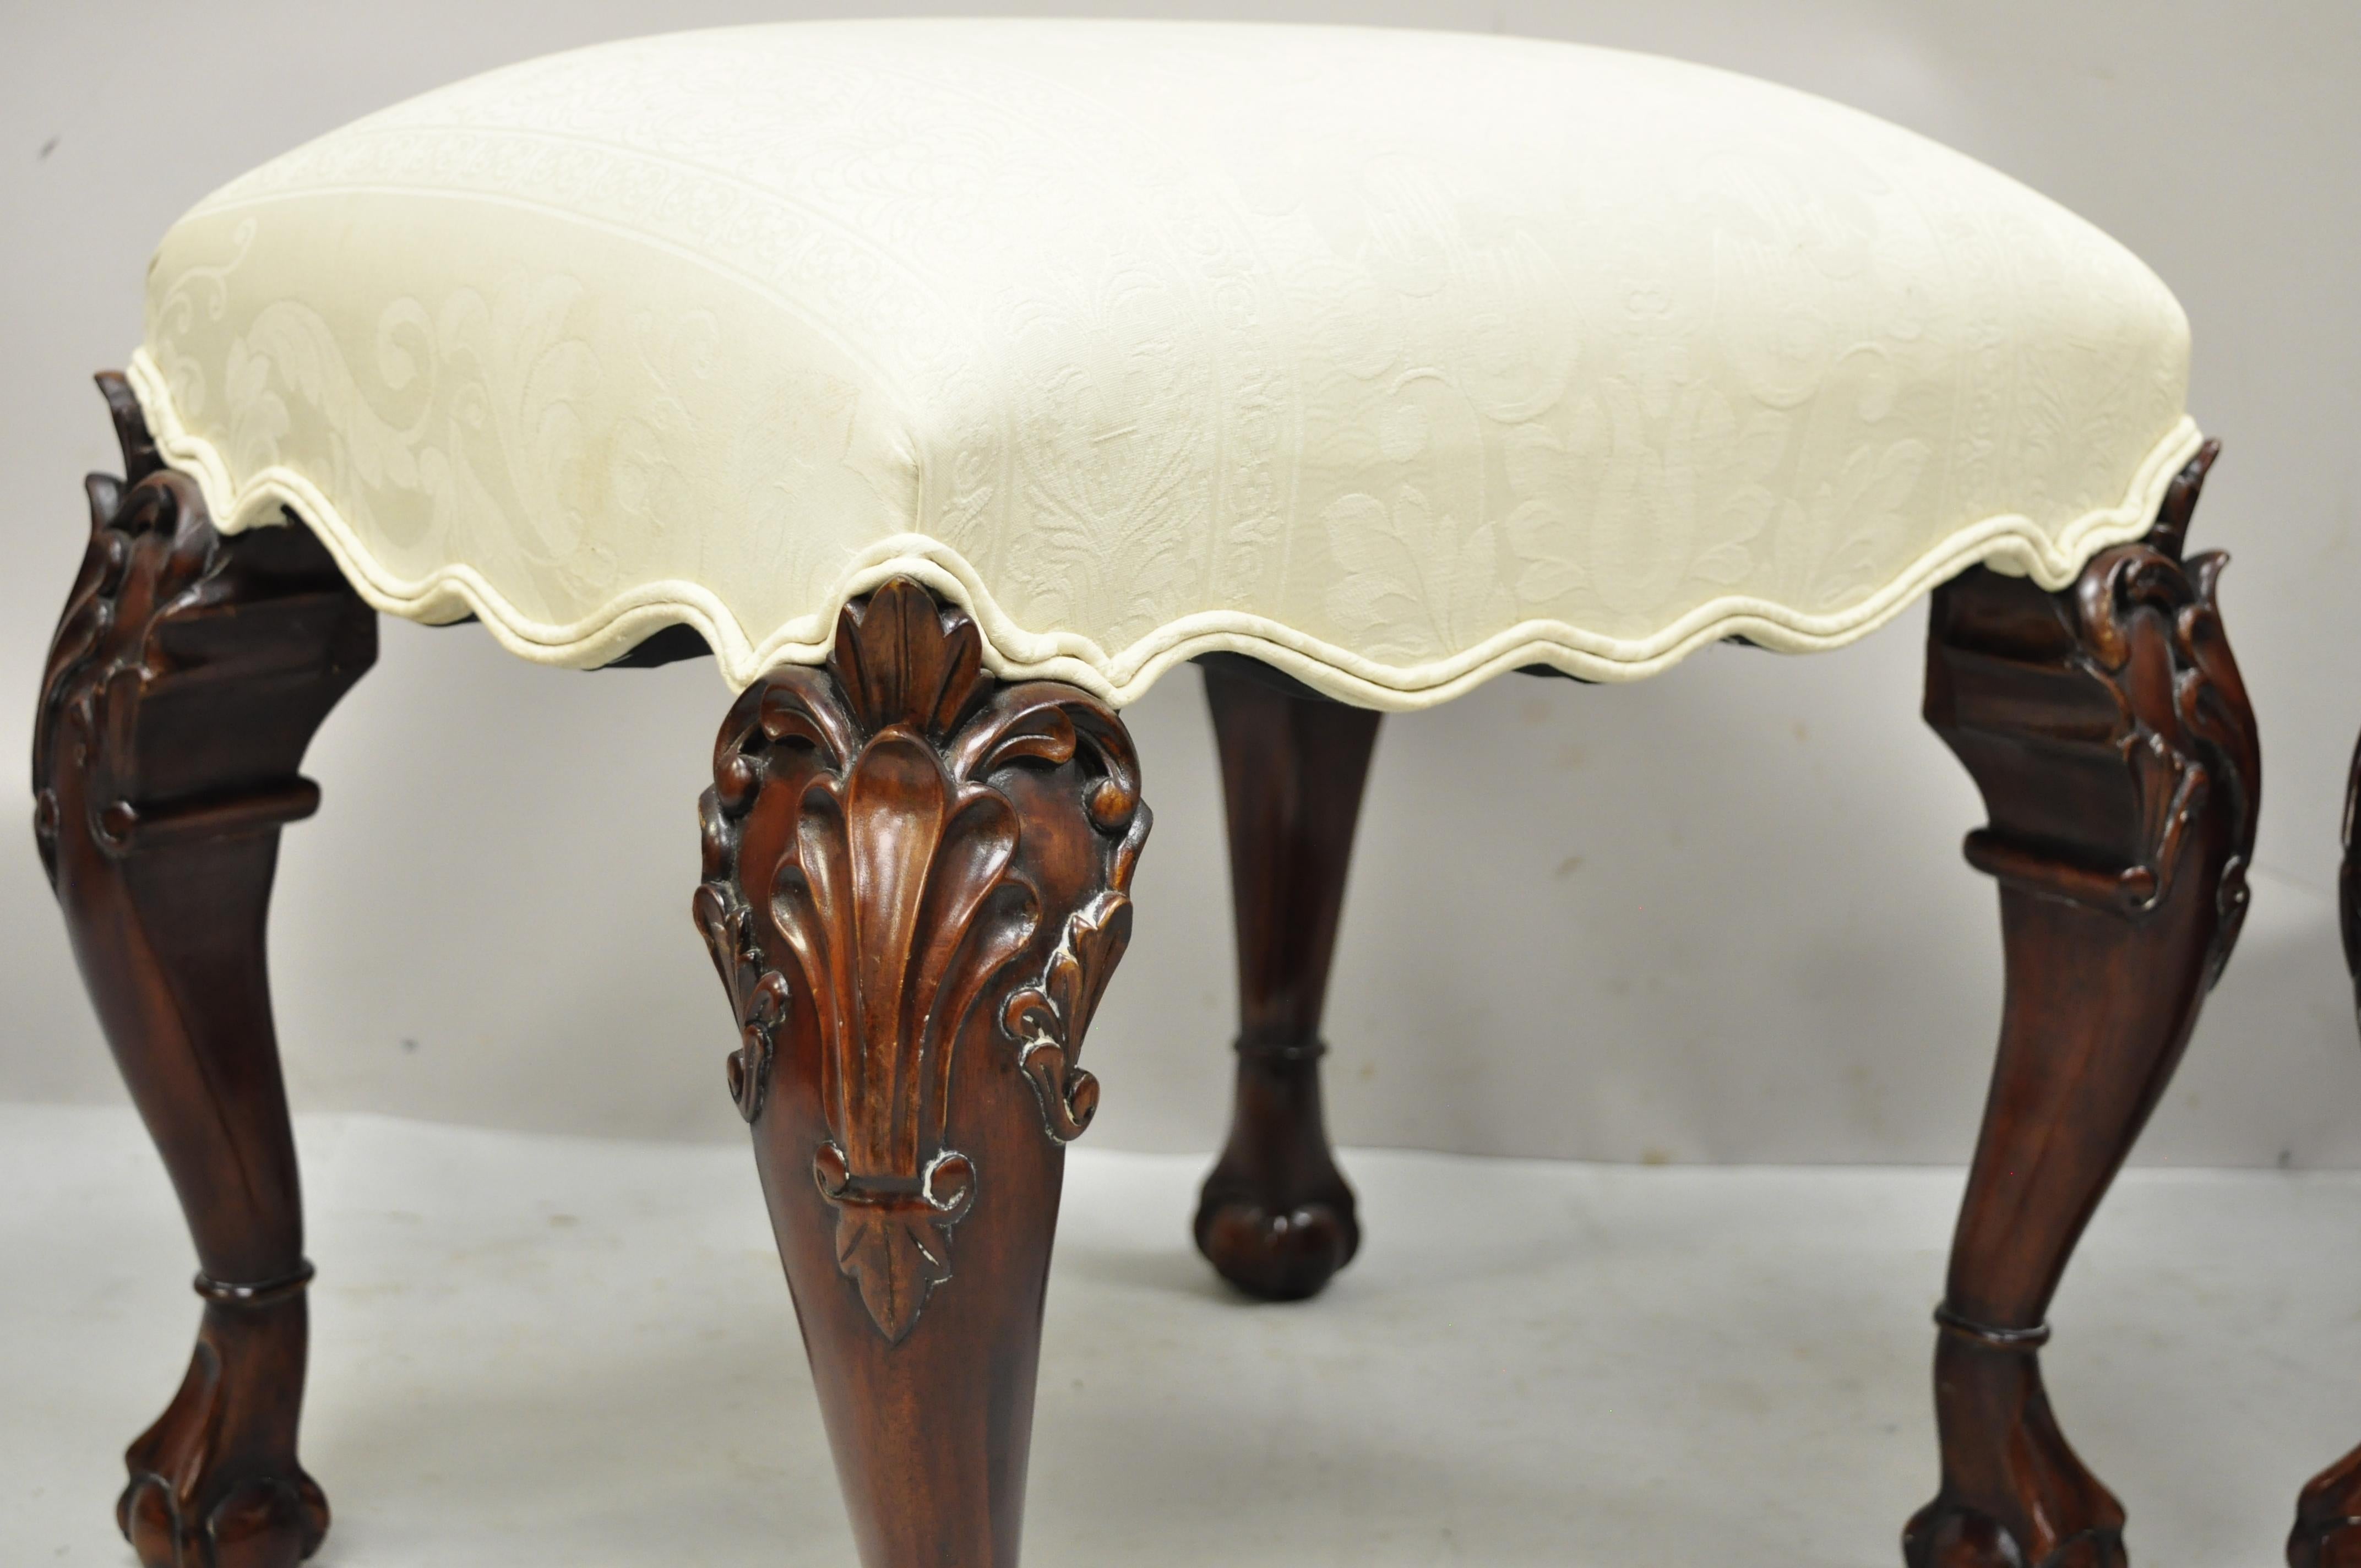 20th Century English Georgian Chippendale Style Carved Mahogany Ball and Claw Stools, Pair For Sale